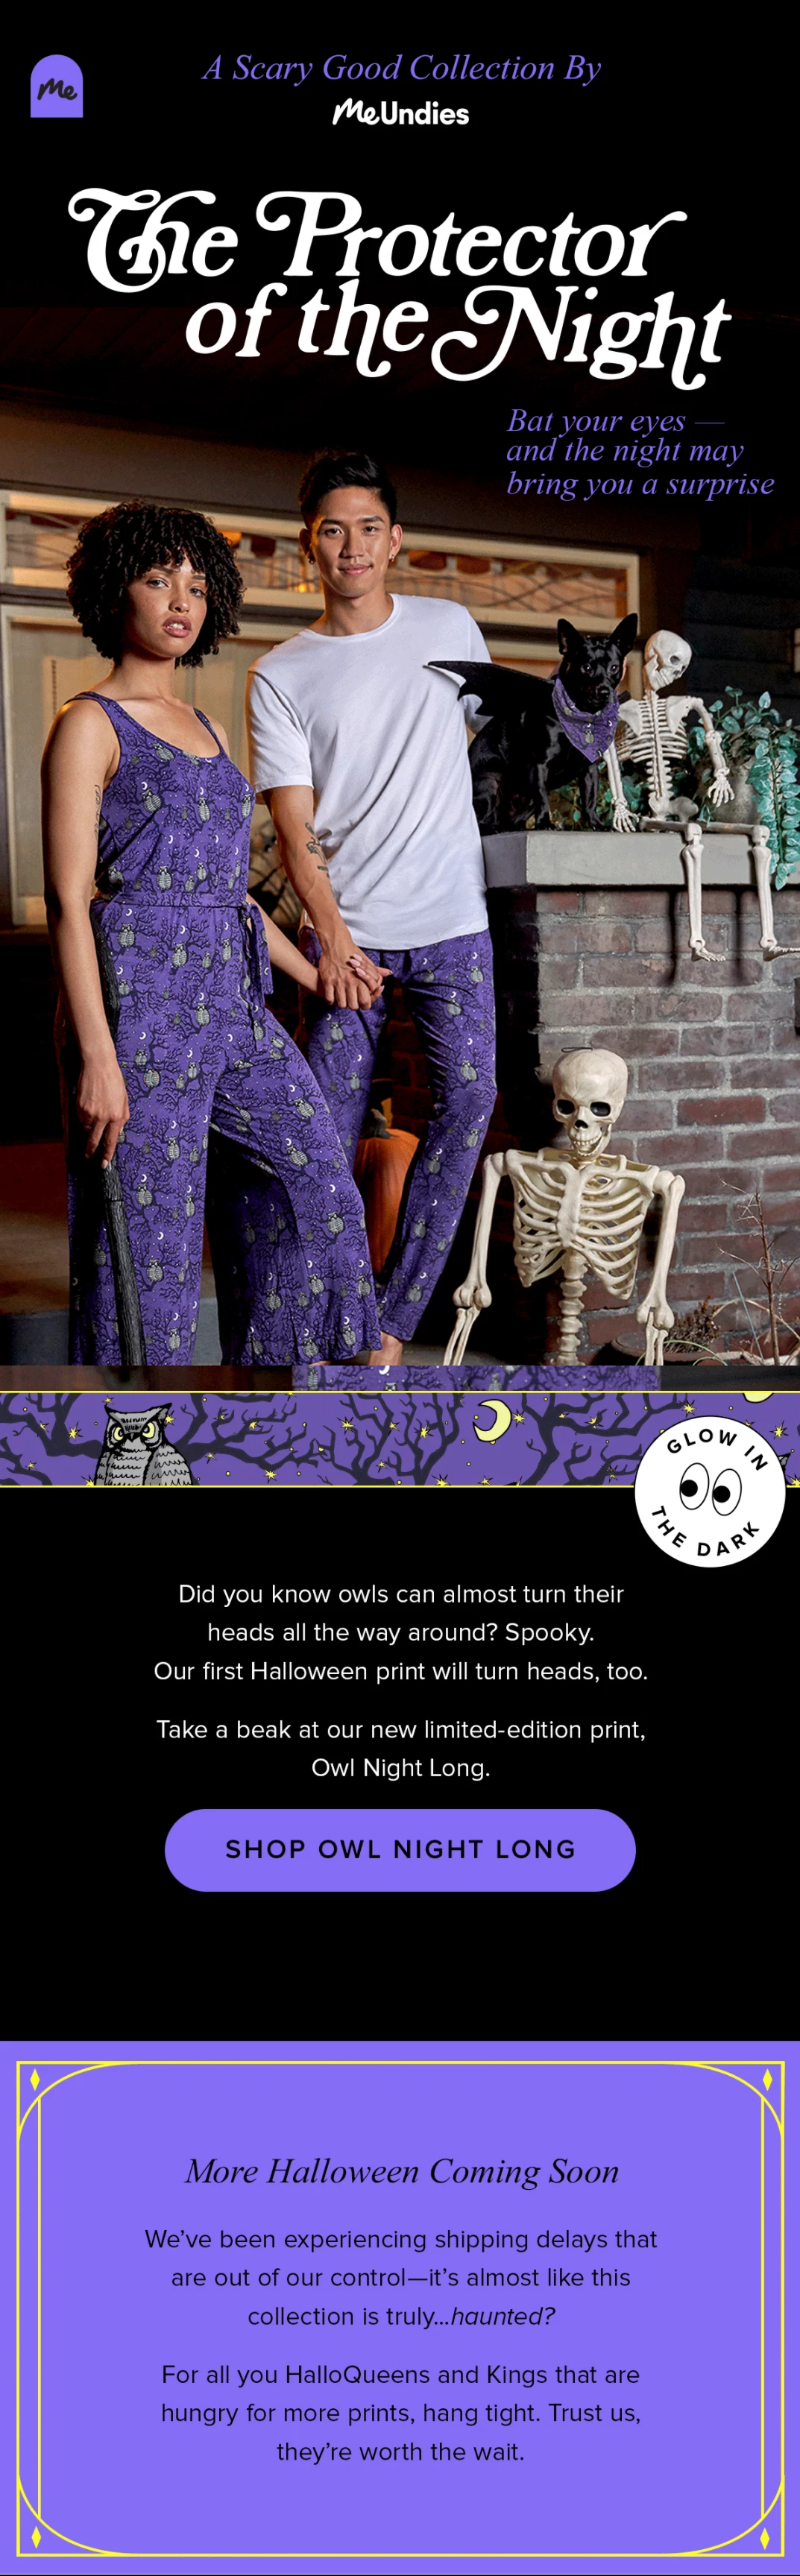 meundies halloween email in purple and black theme with purple call to action button